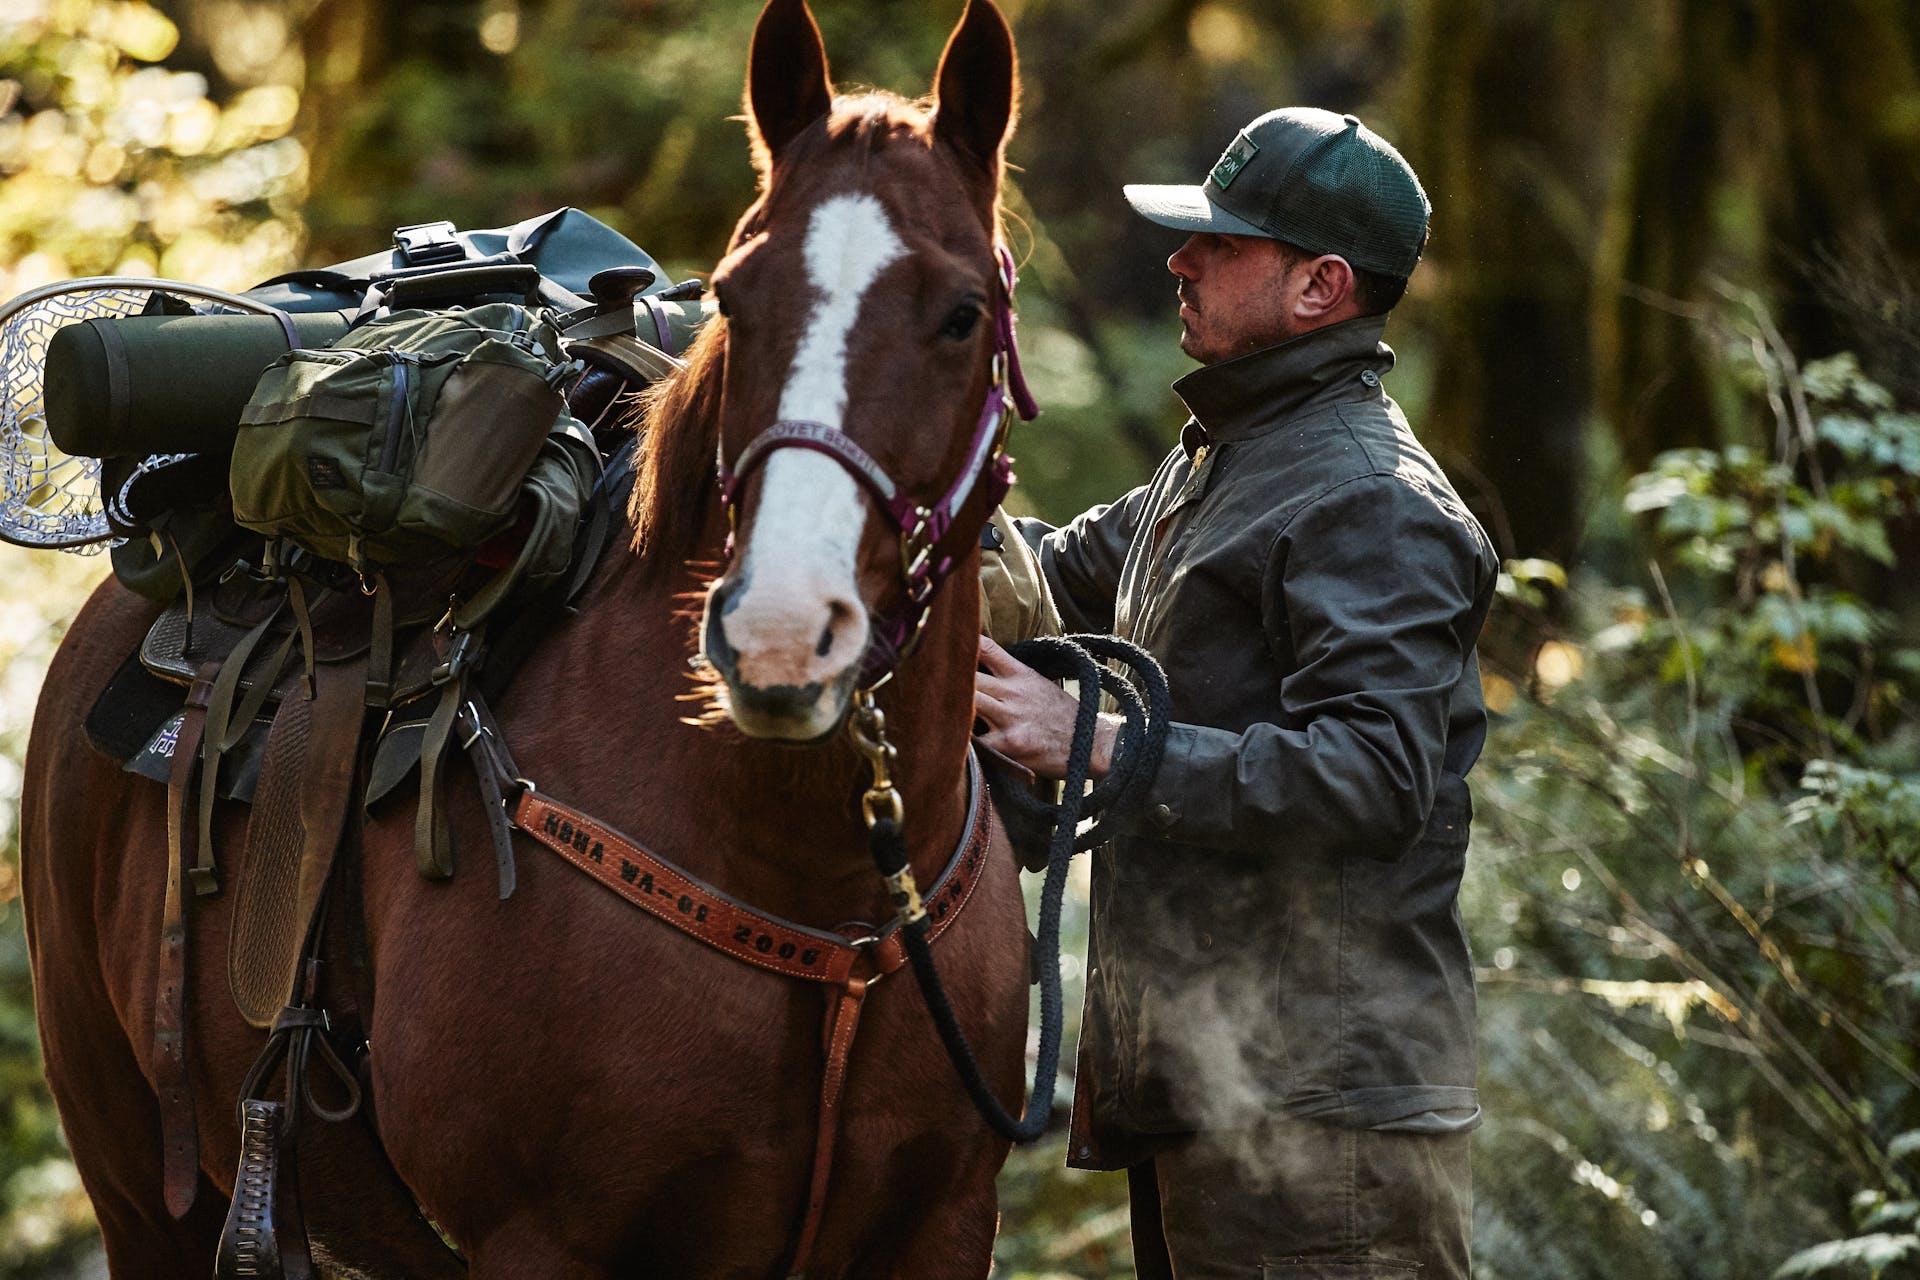 Man wearing Filson Cover Cloth Mile Marker Coat in otter green inspecting items on horse saddle